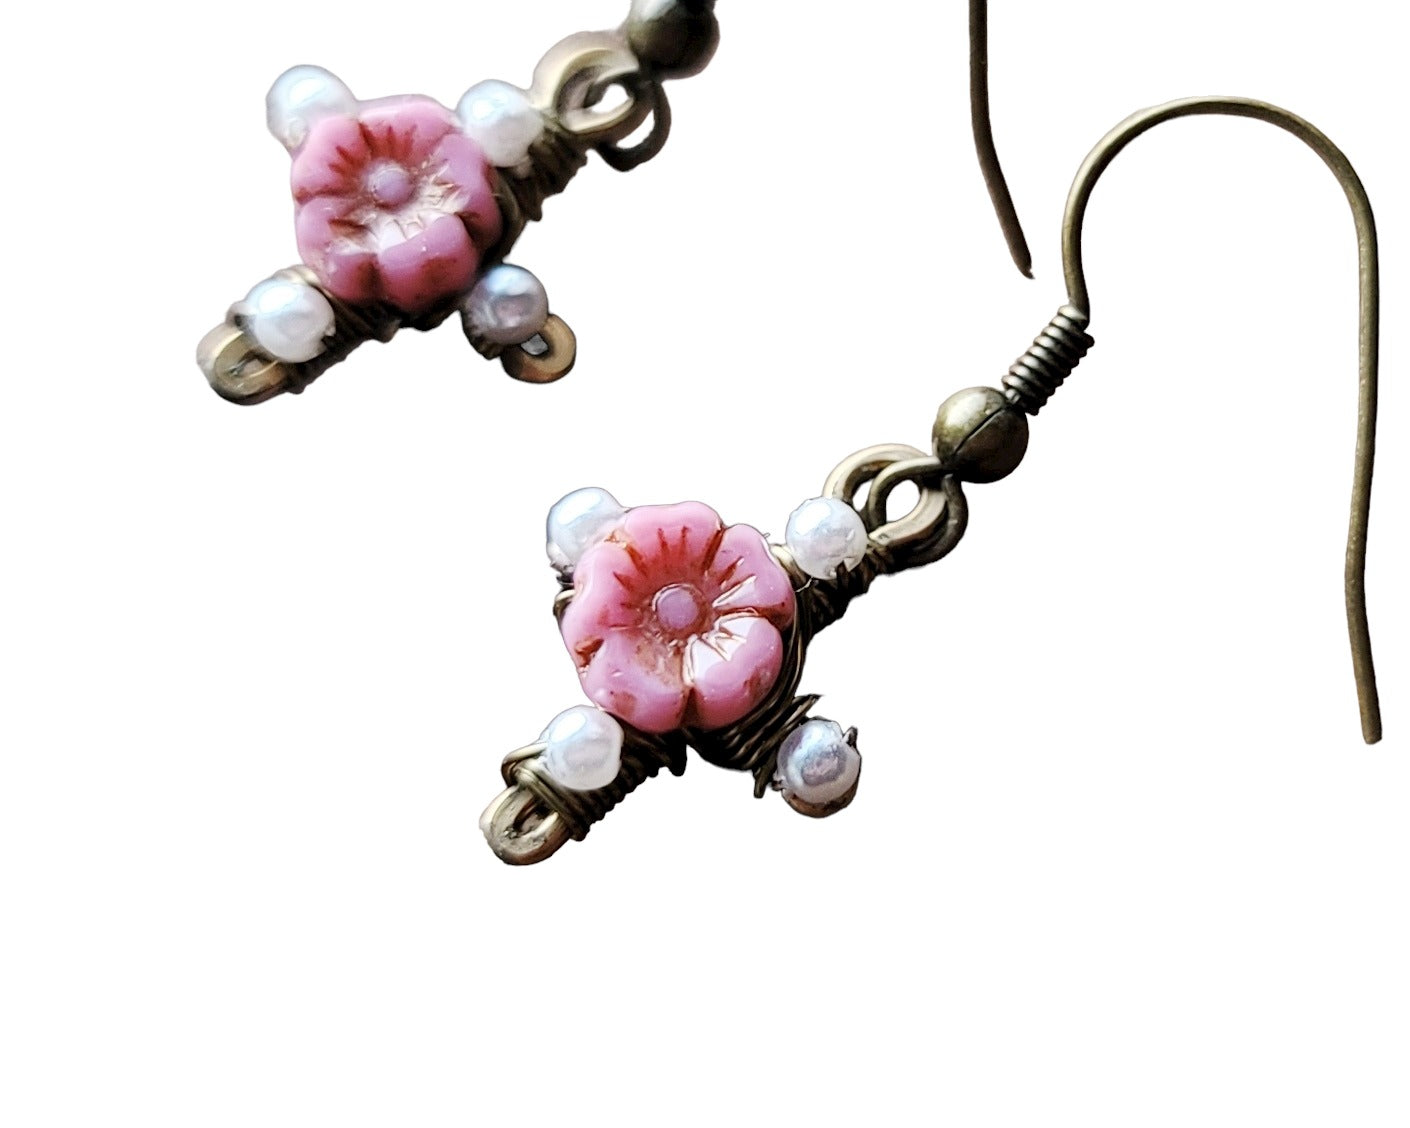 Antique Style Pink Flower Cross, Vintage Inspired Cross Earrings with red flowers in the centre and tiny white pearls on the four points of the cross made with antiqued brass metal.